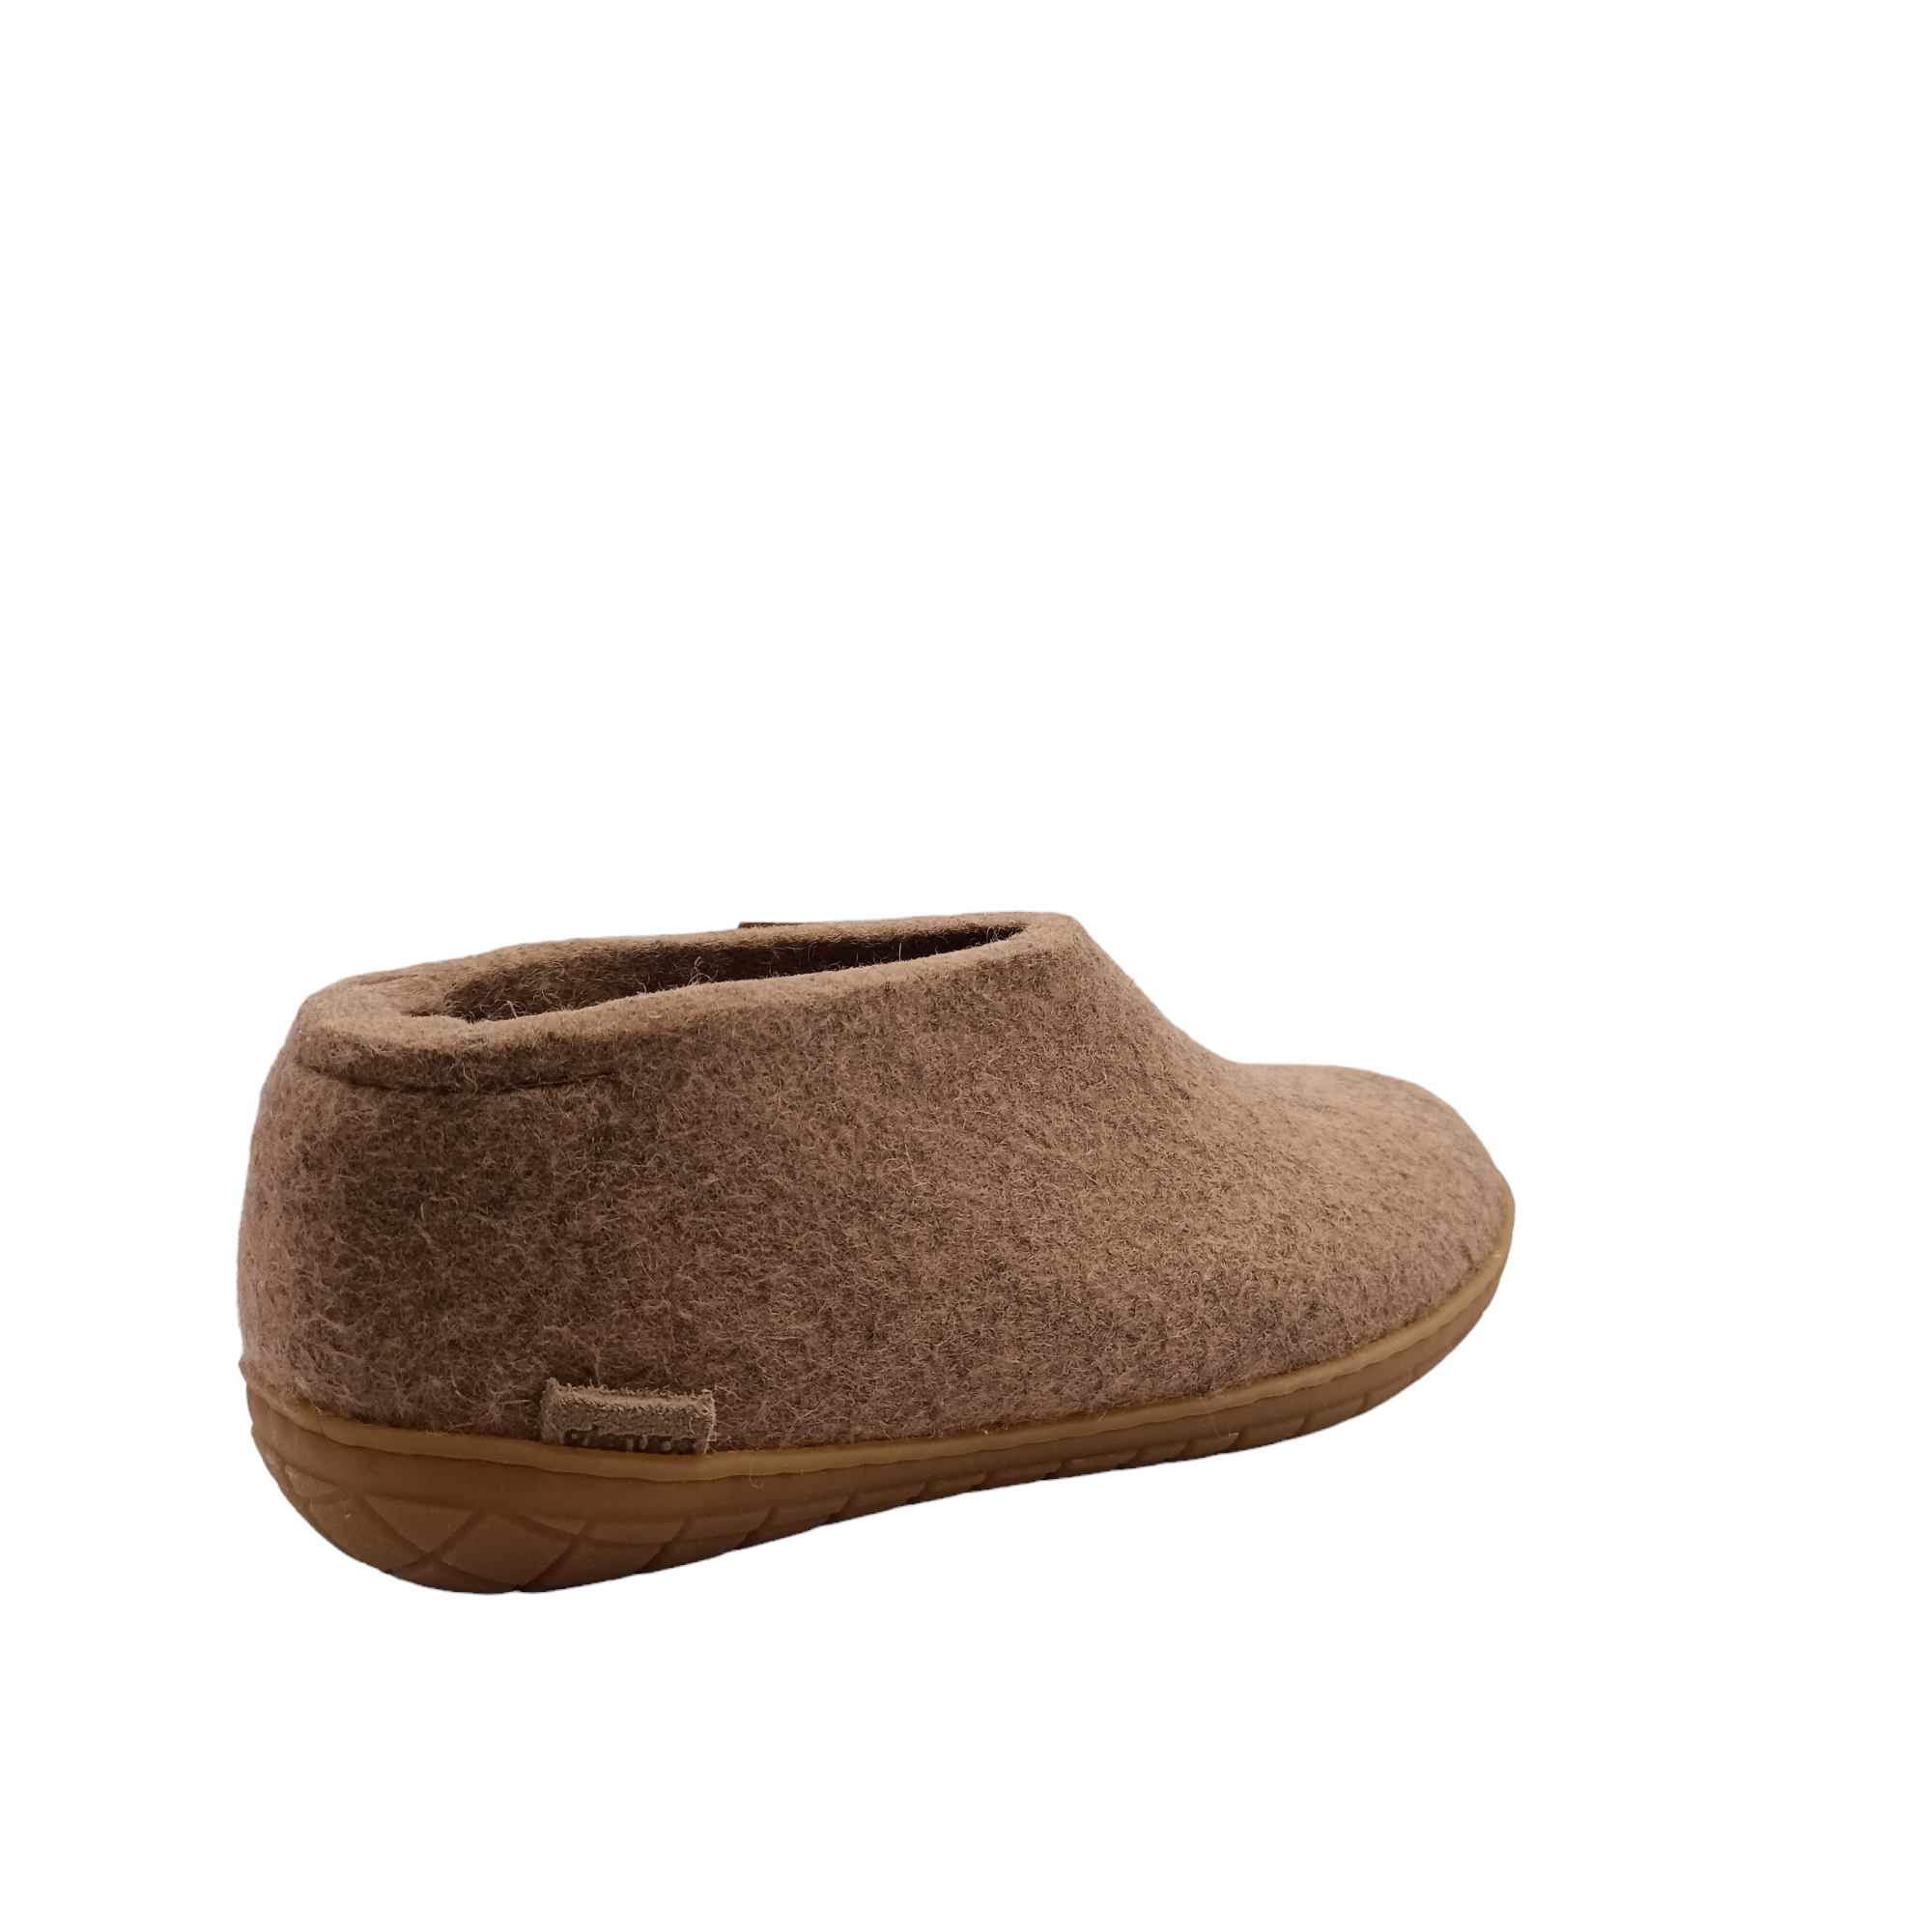 Back angle view off sand coloured felt wool Glerup shoe or slipper with natural rubber sole. Shop slippers online and instore with shoe&me Mount Maunganui.